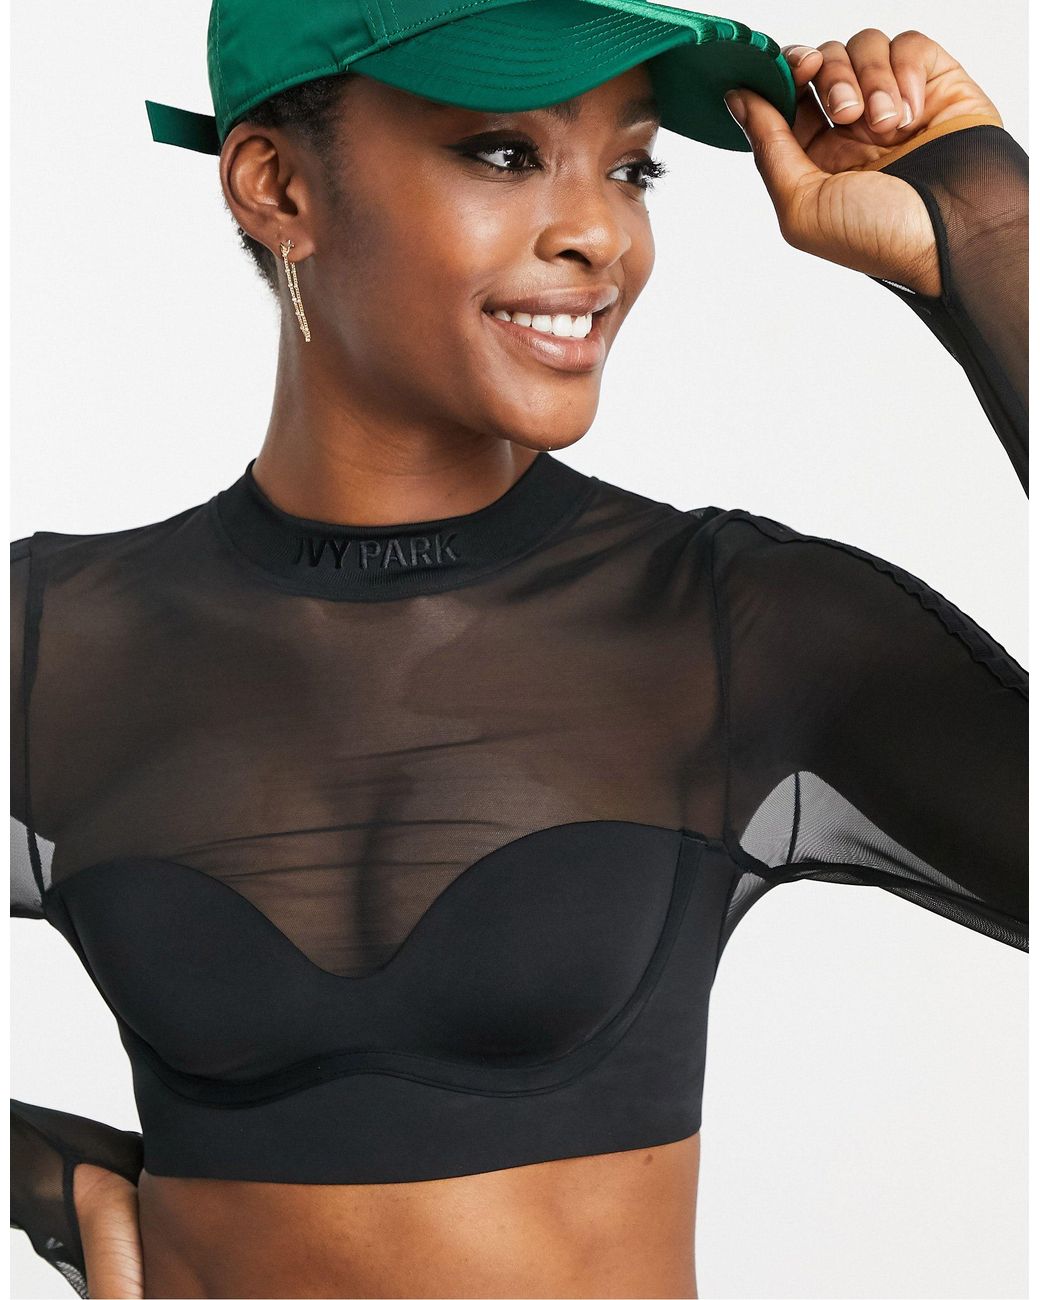 Ivy Park Adidas X Cropped Mesh Long Sleeve Top in Black